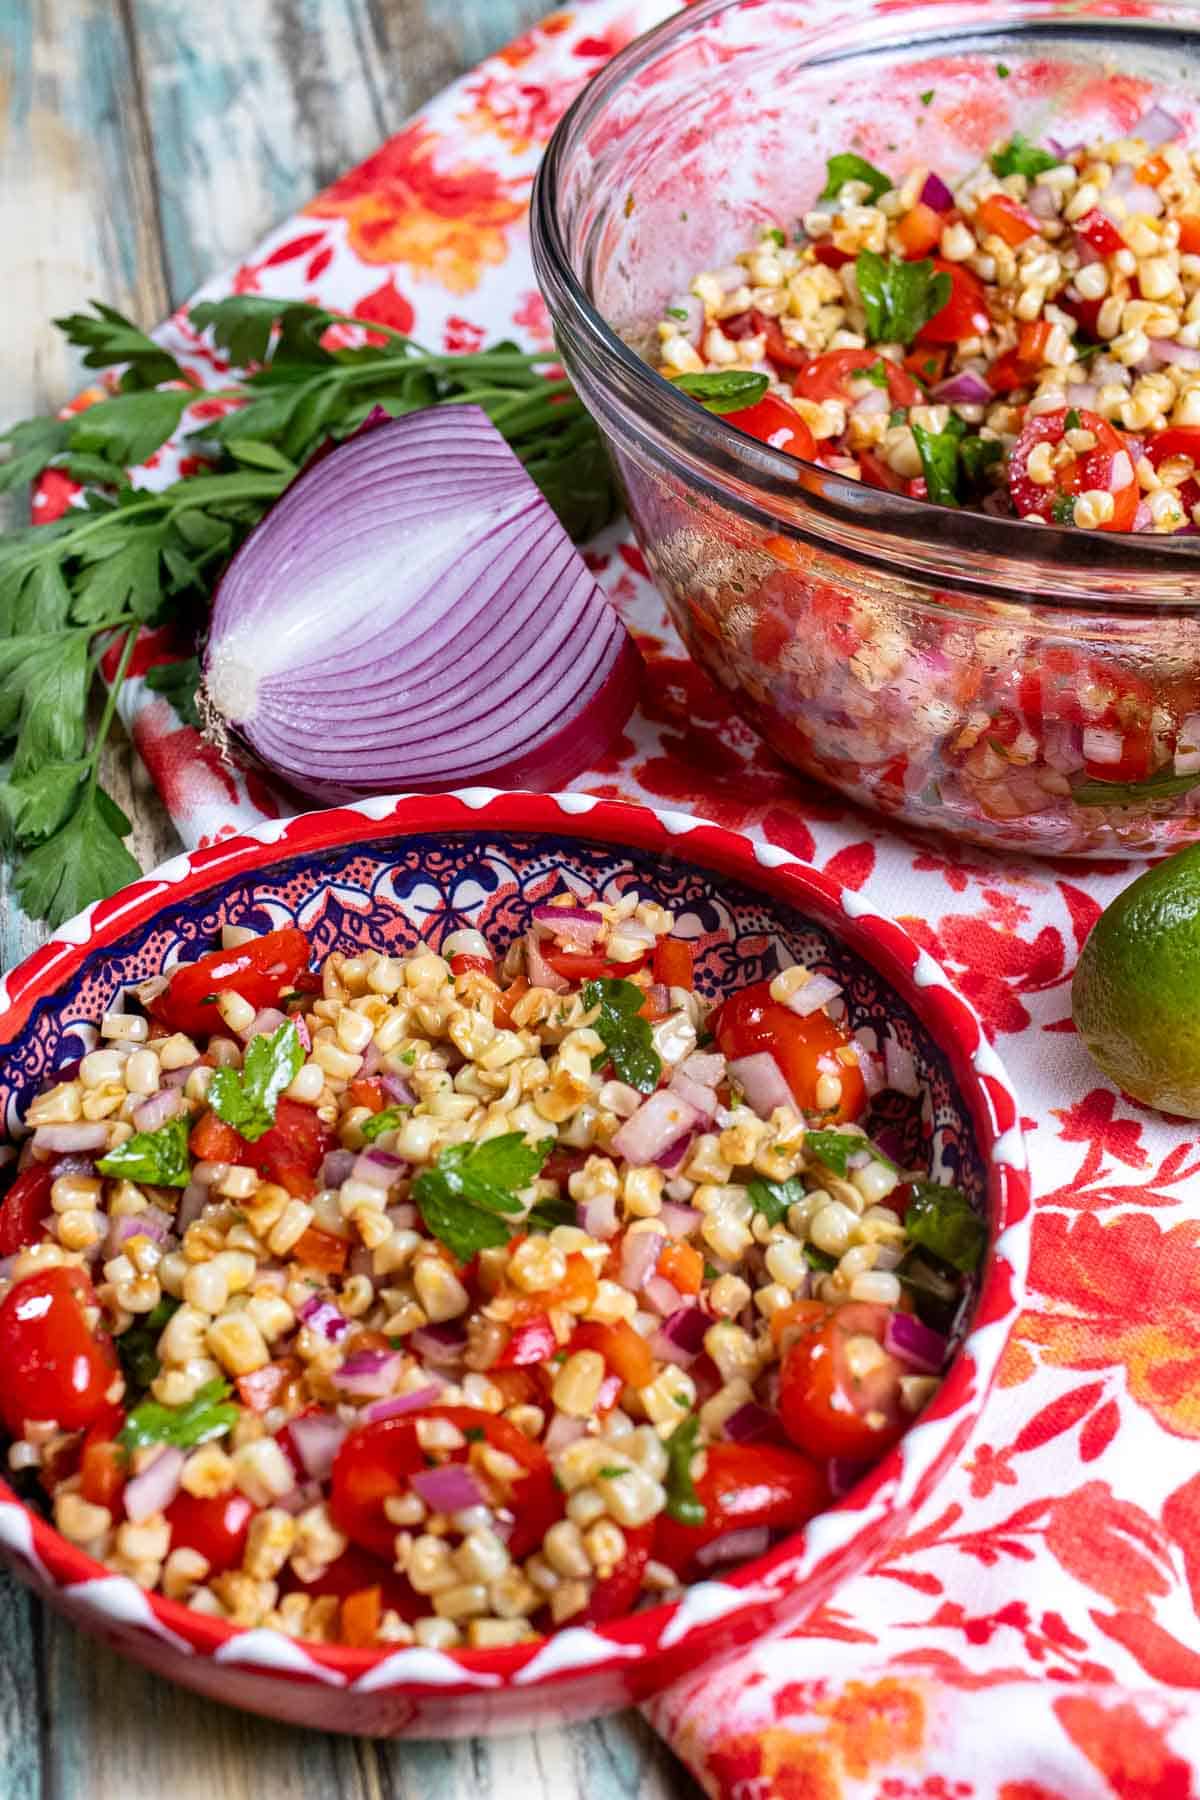 Roasted corn salad in a glass mixing bowl with a portion in front in a red and white bowl.